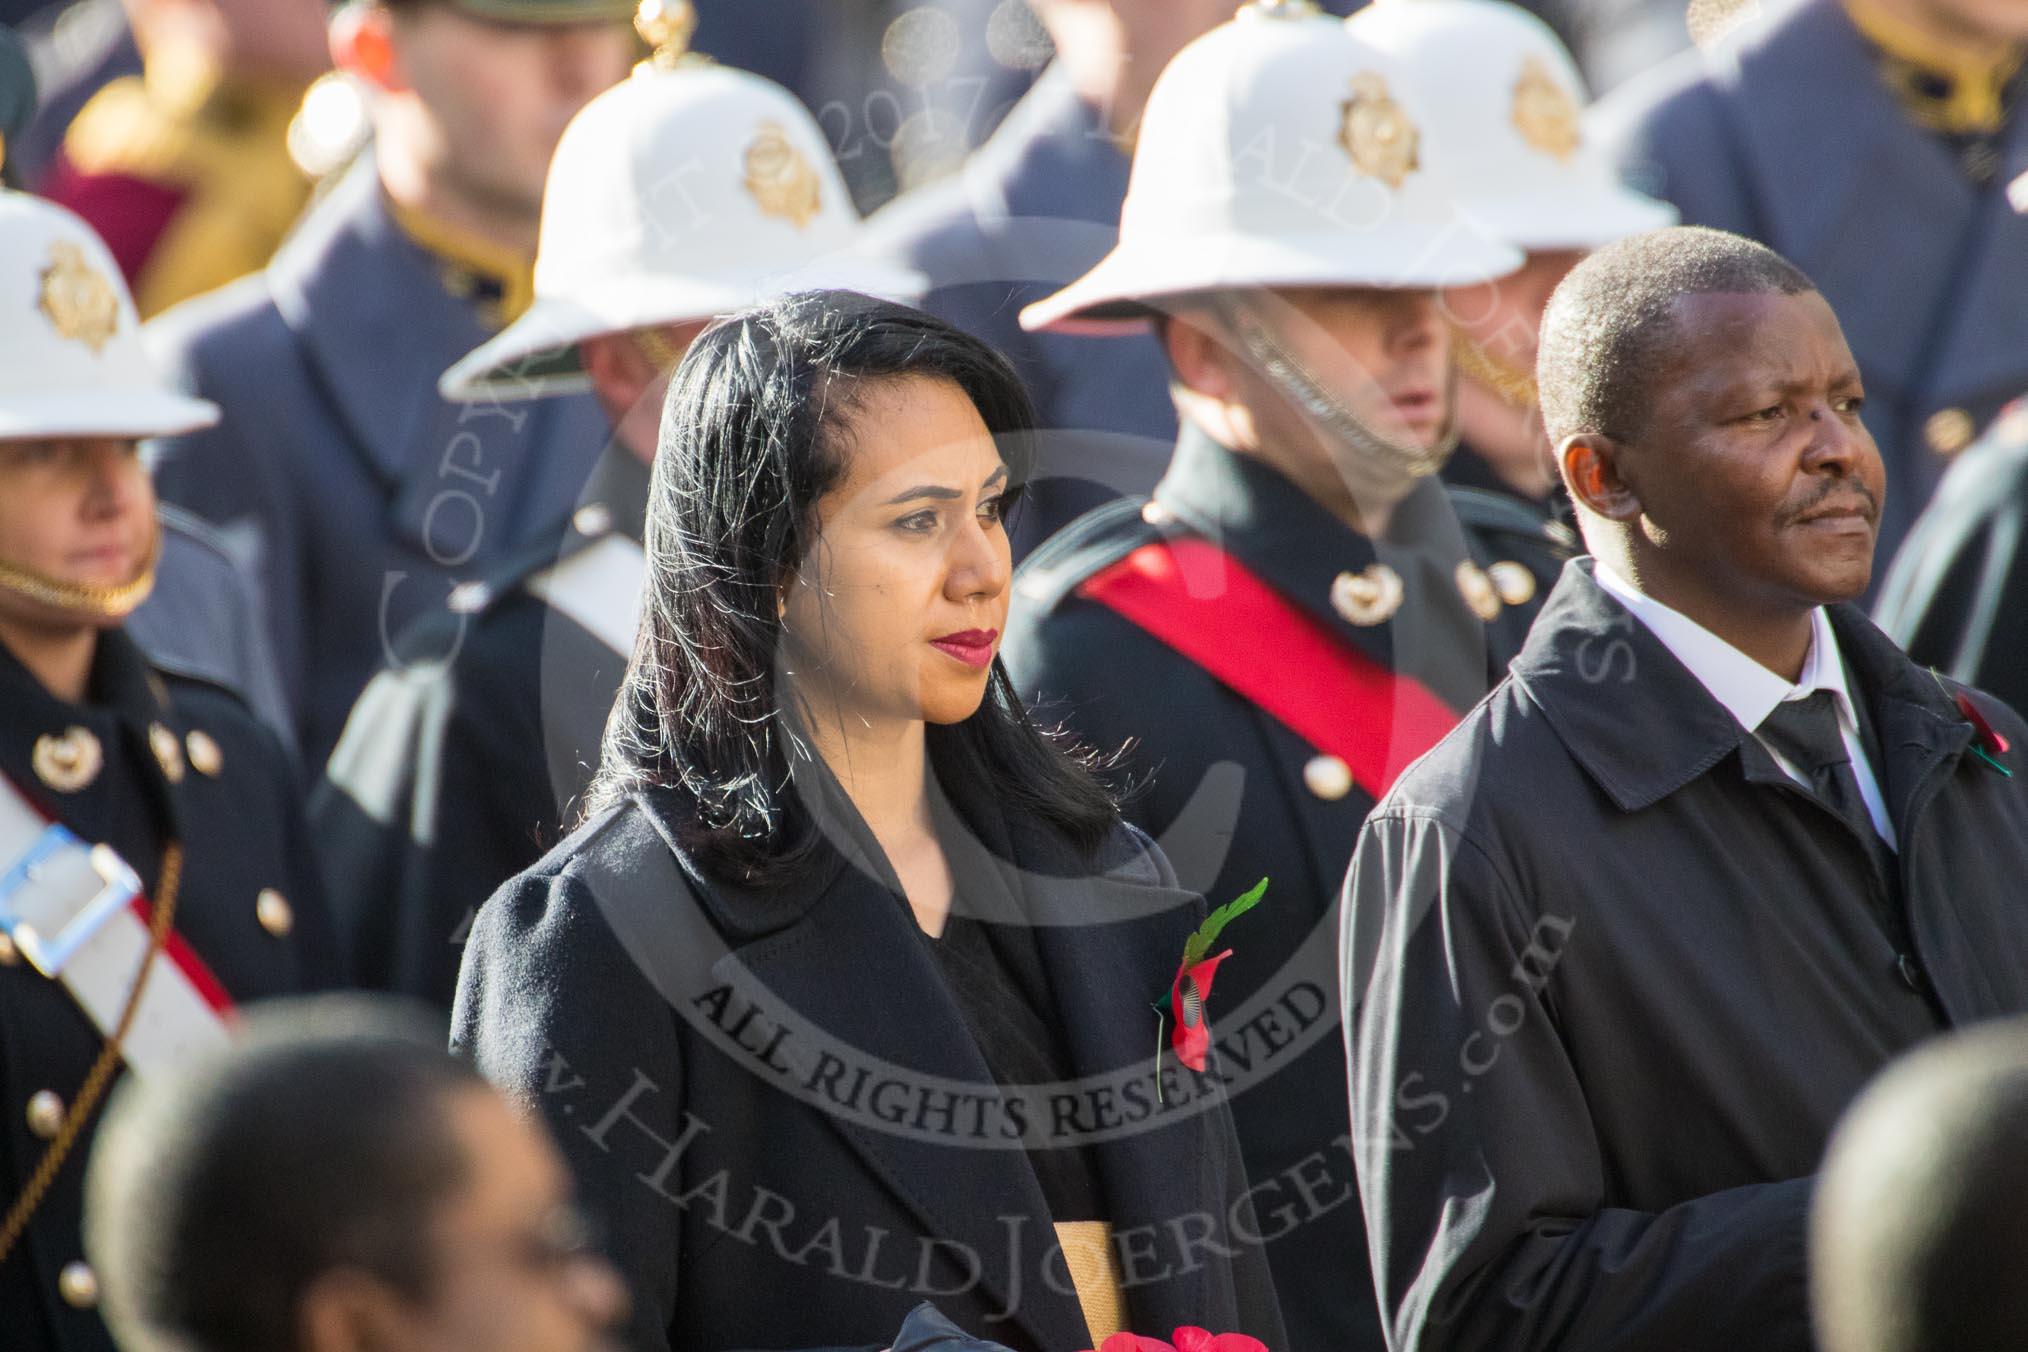 The High Commissioner of Tonga, Titilupe Fanetupouvava'u Tu'ivakano, and The High Commissioner of Eswatini during Remembrance Sunday Cenotaph Ceremony 2018 at Horse Guards Parade, Westminster, London, 11 November 2018, 11:03.